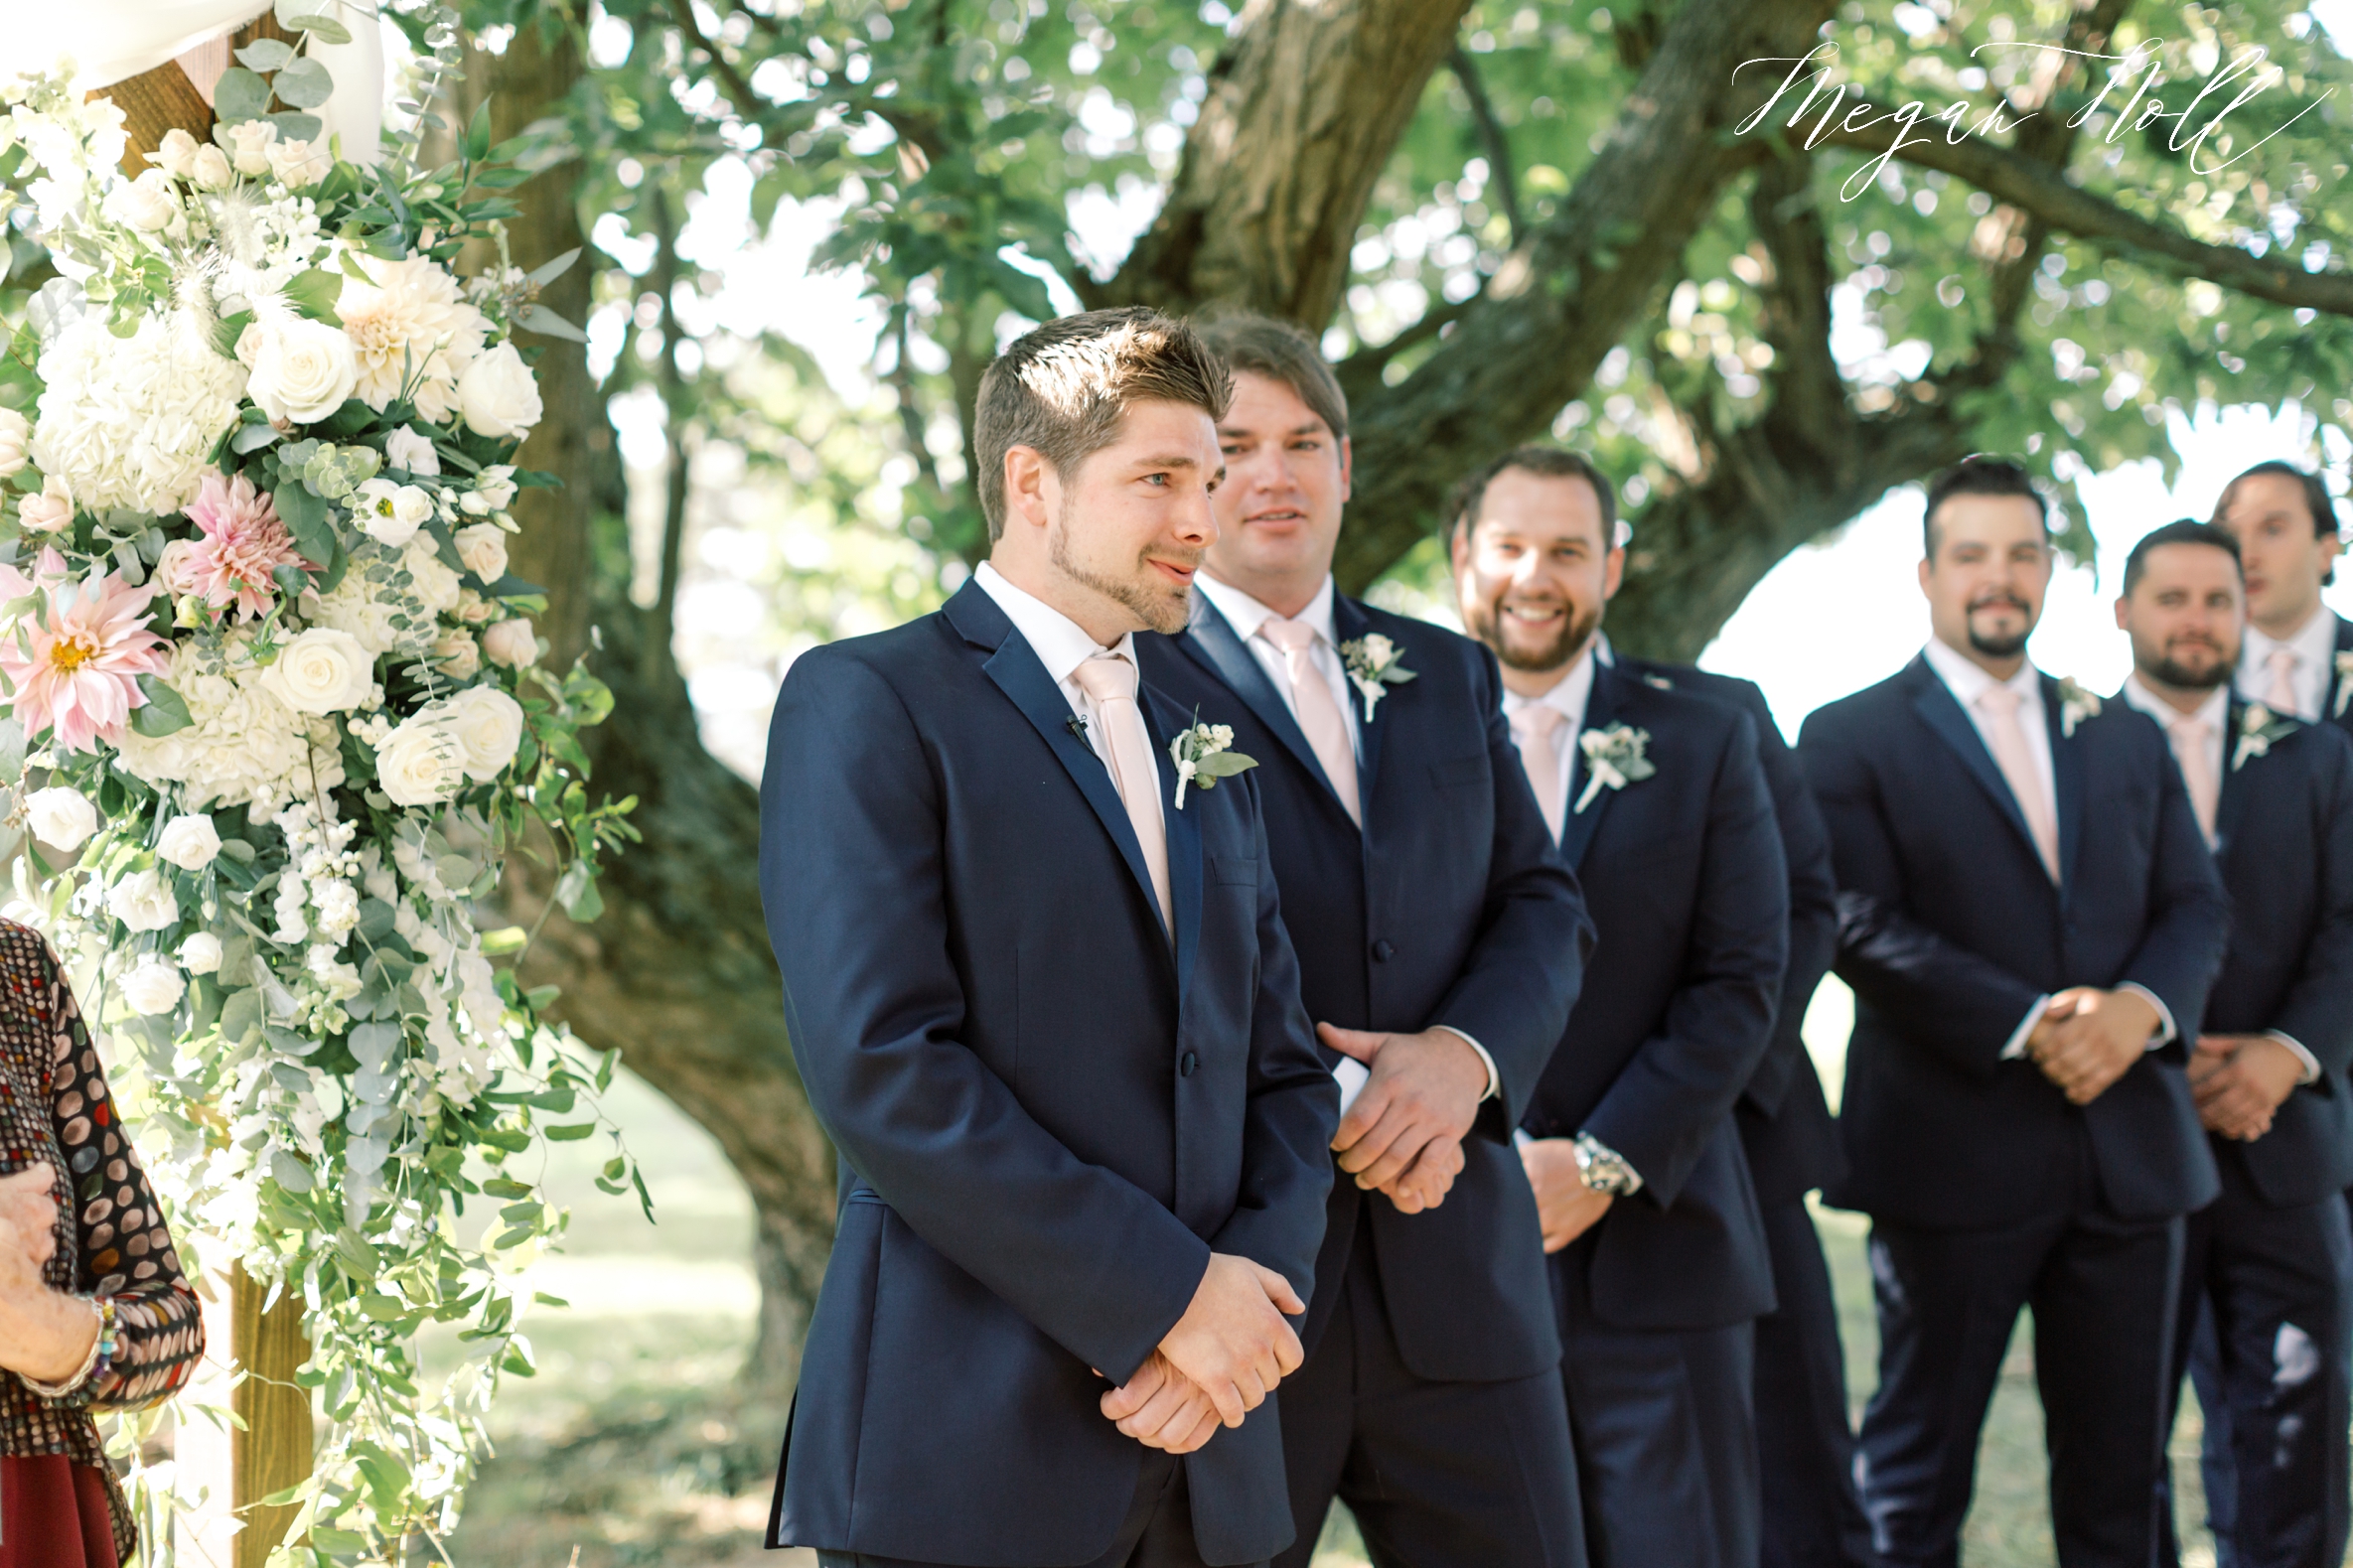 Groom reaction to bride walking down the aisle